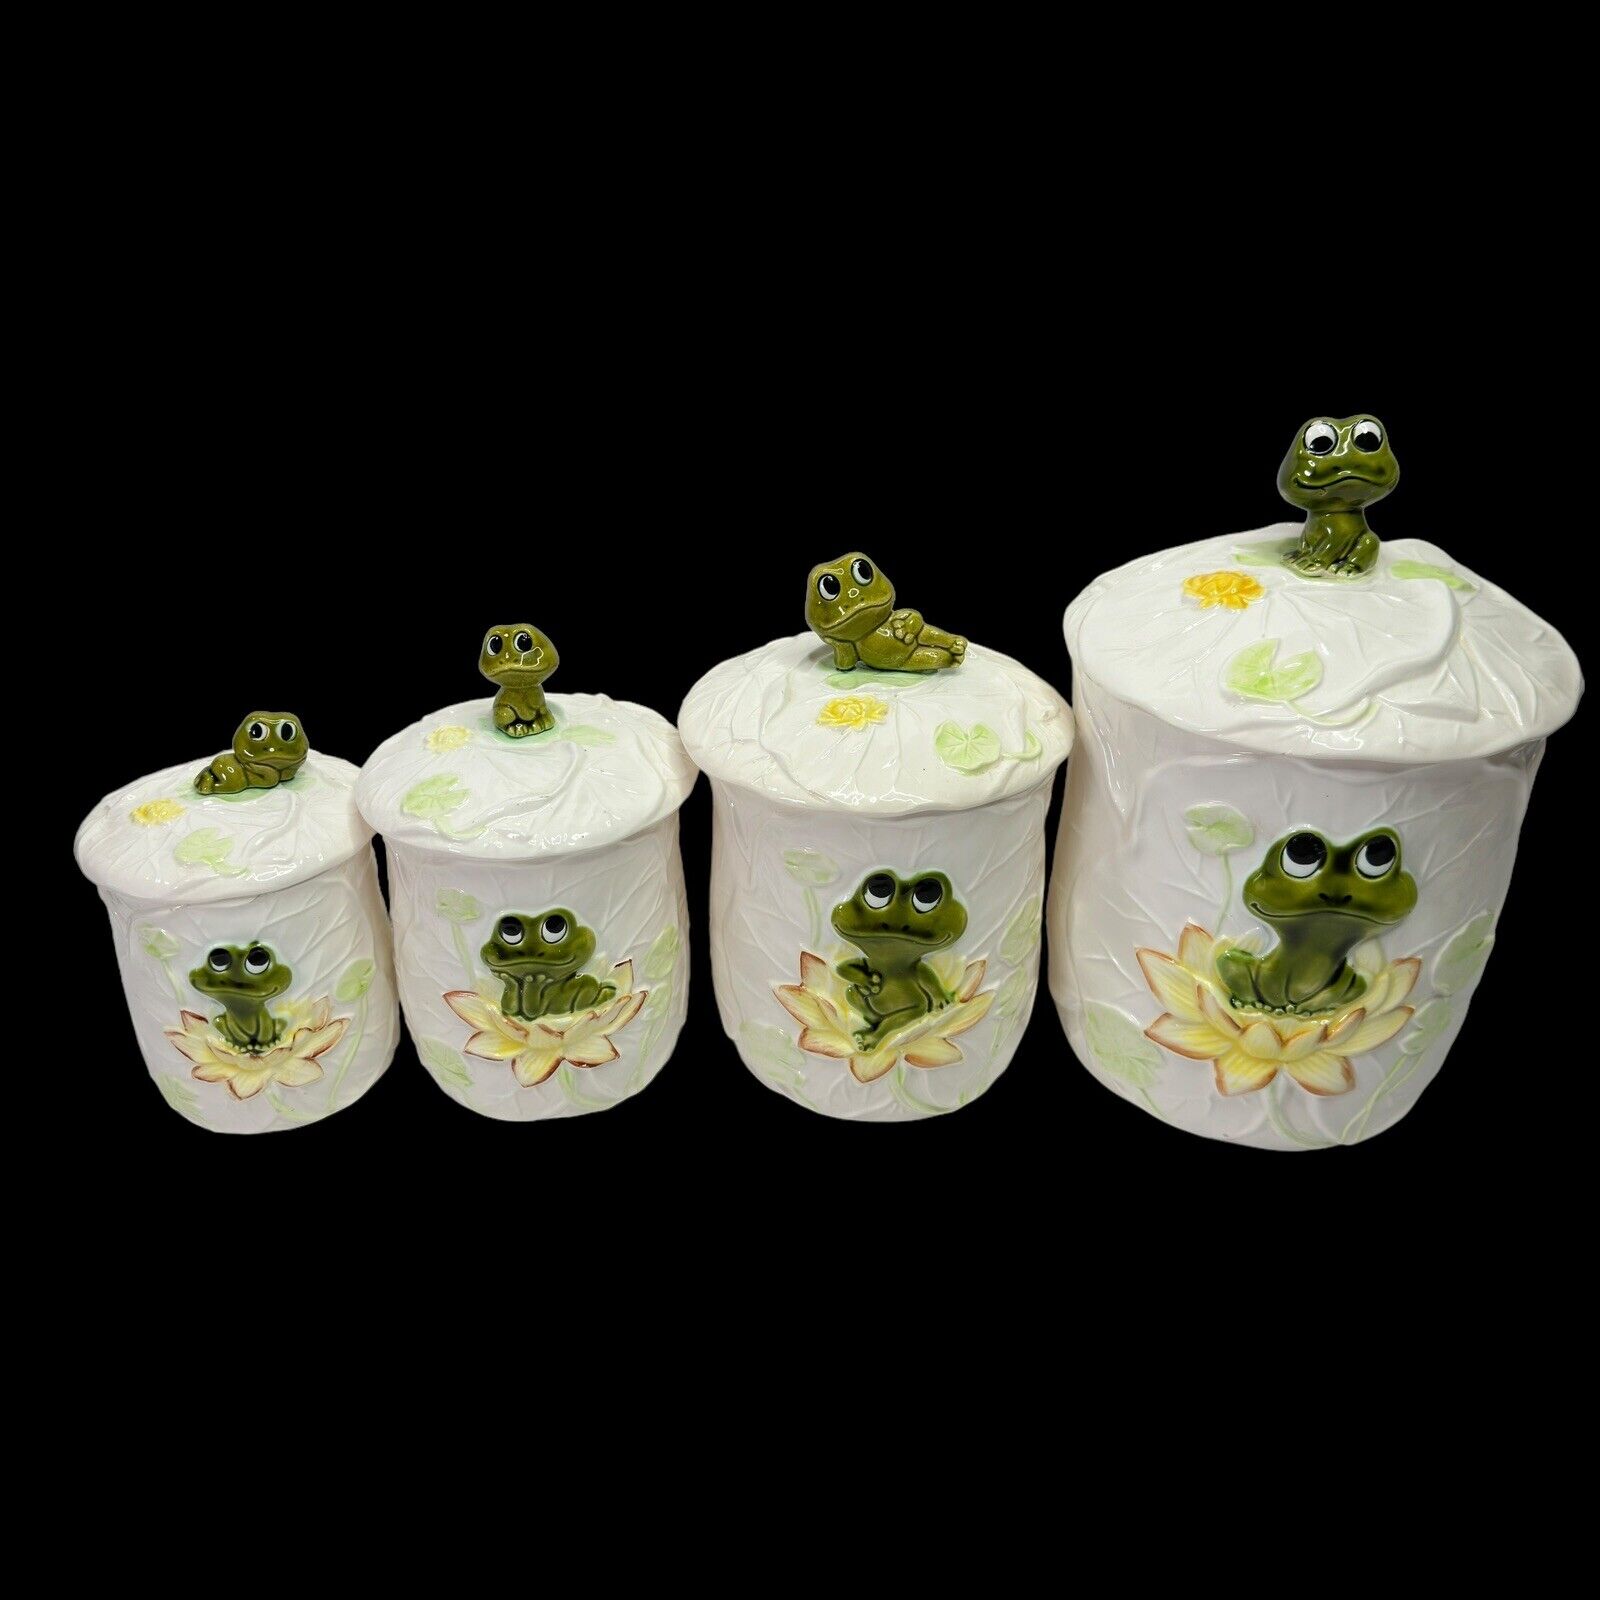 Vintage Sears Roebuck Neil the Frog Canister Set of 4